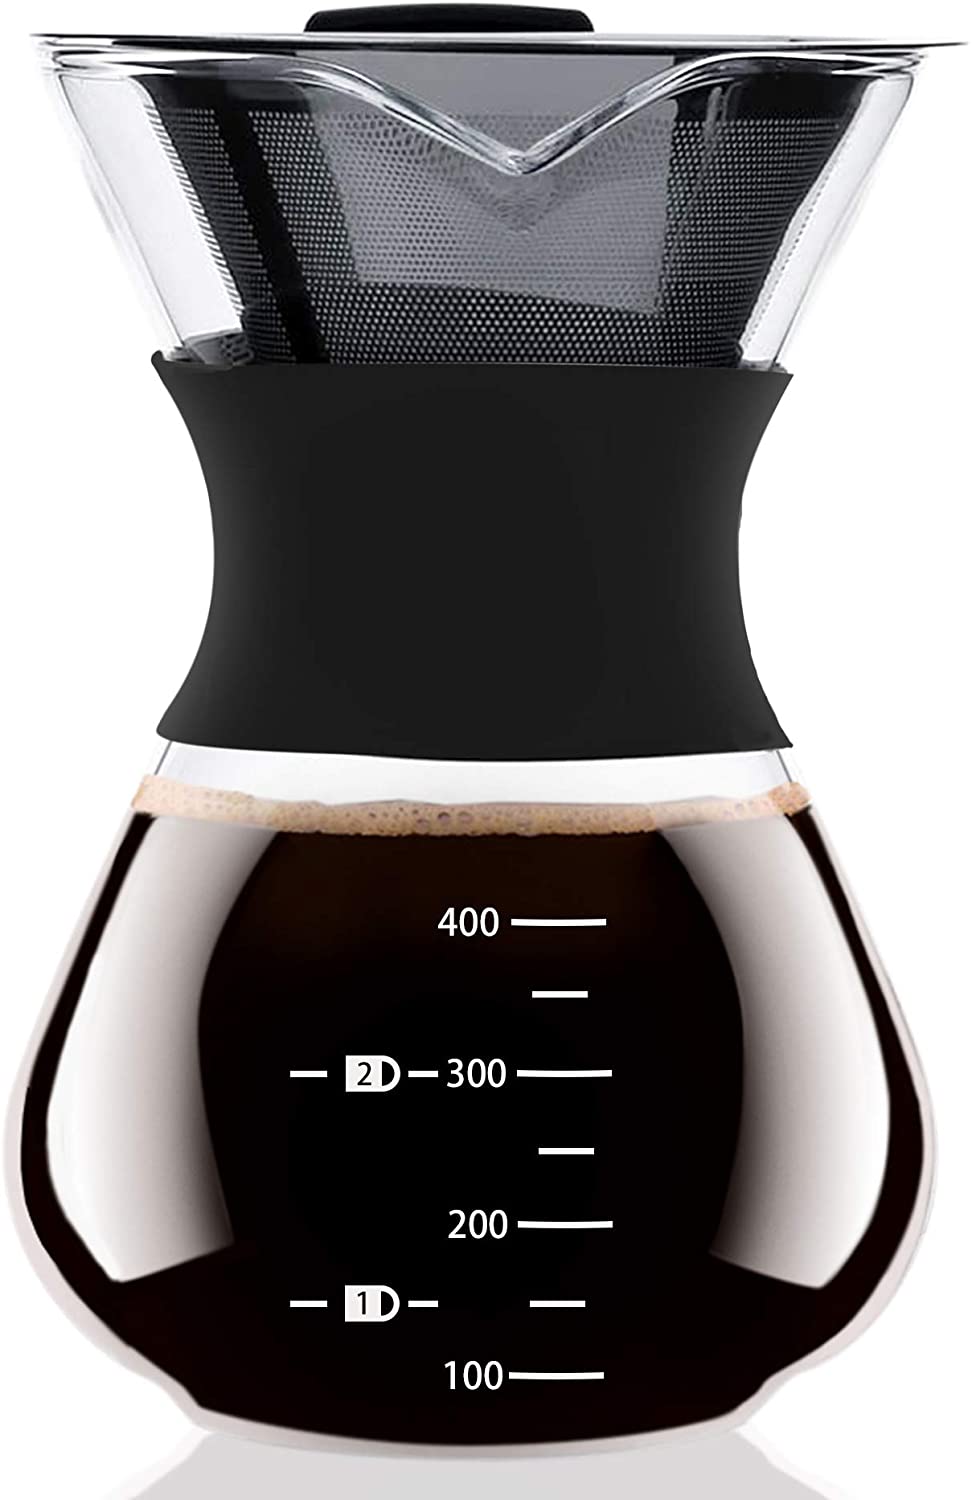 ISKM Manuell Pour Over Coffee Maker, Coffee Maker, Coffee Maker, Coffee Filter, Press Filter Jug, Borosilicate Glass with Permanent Filter Made of Stainless Steel (400 ml)